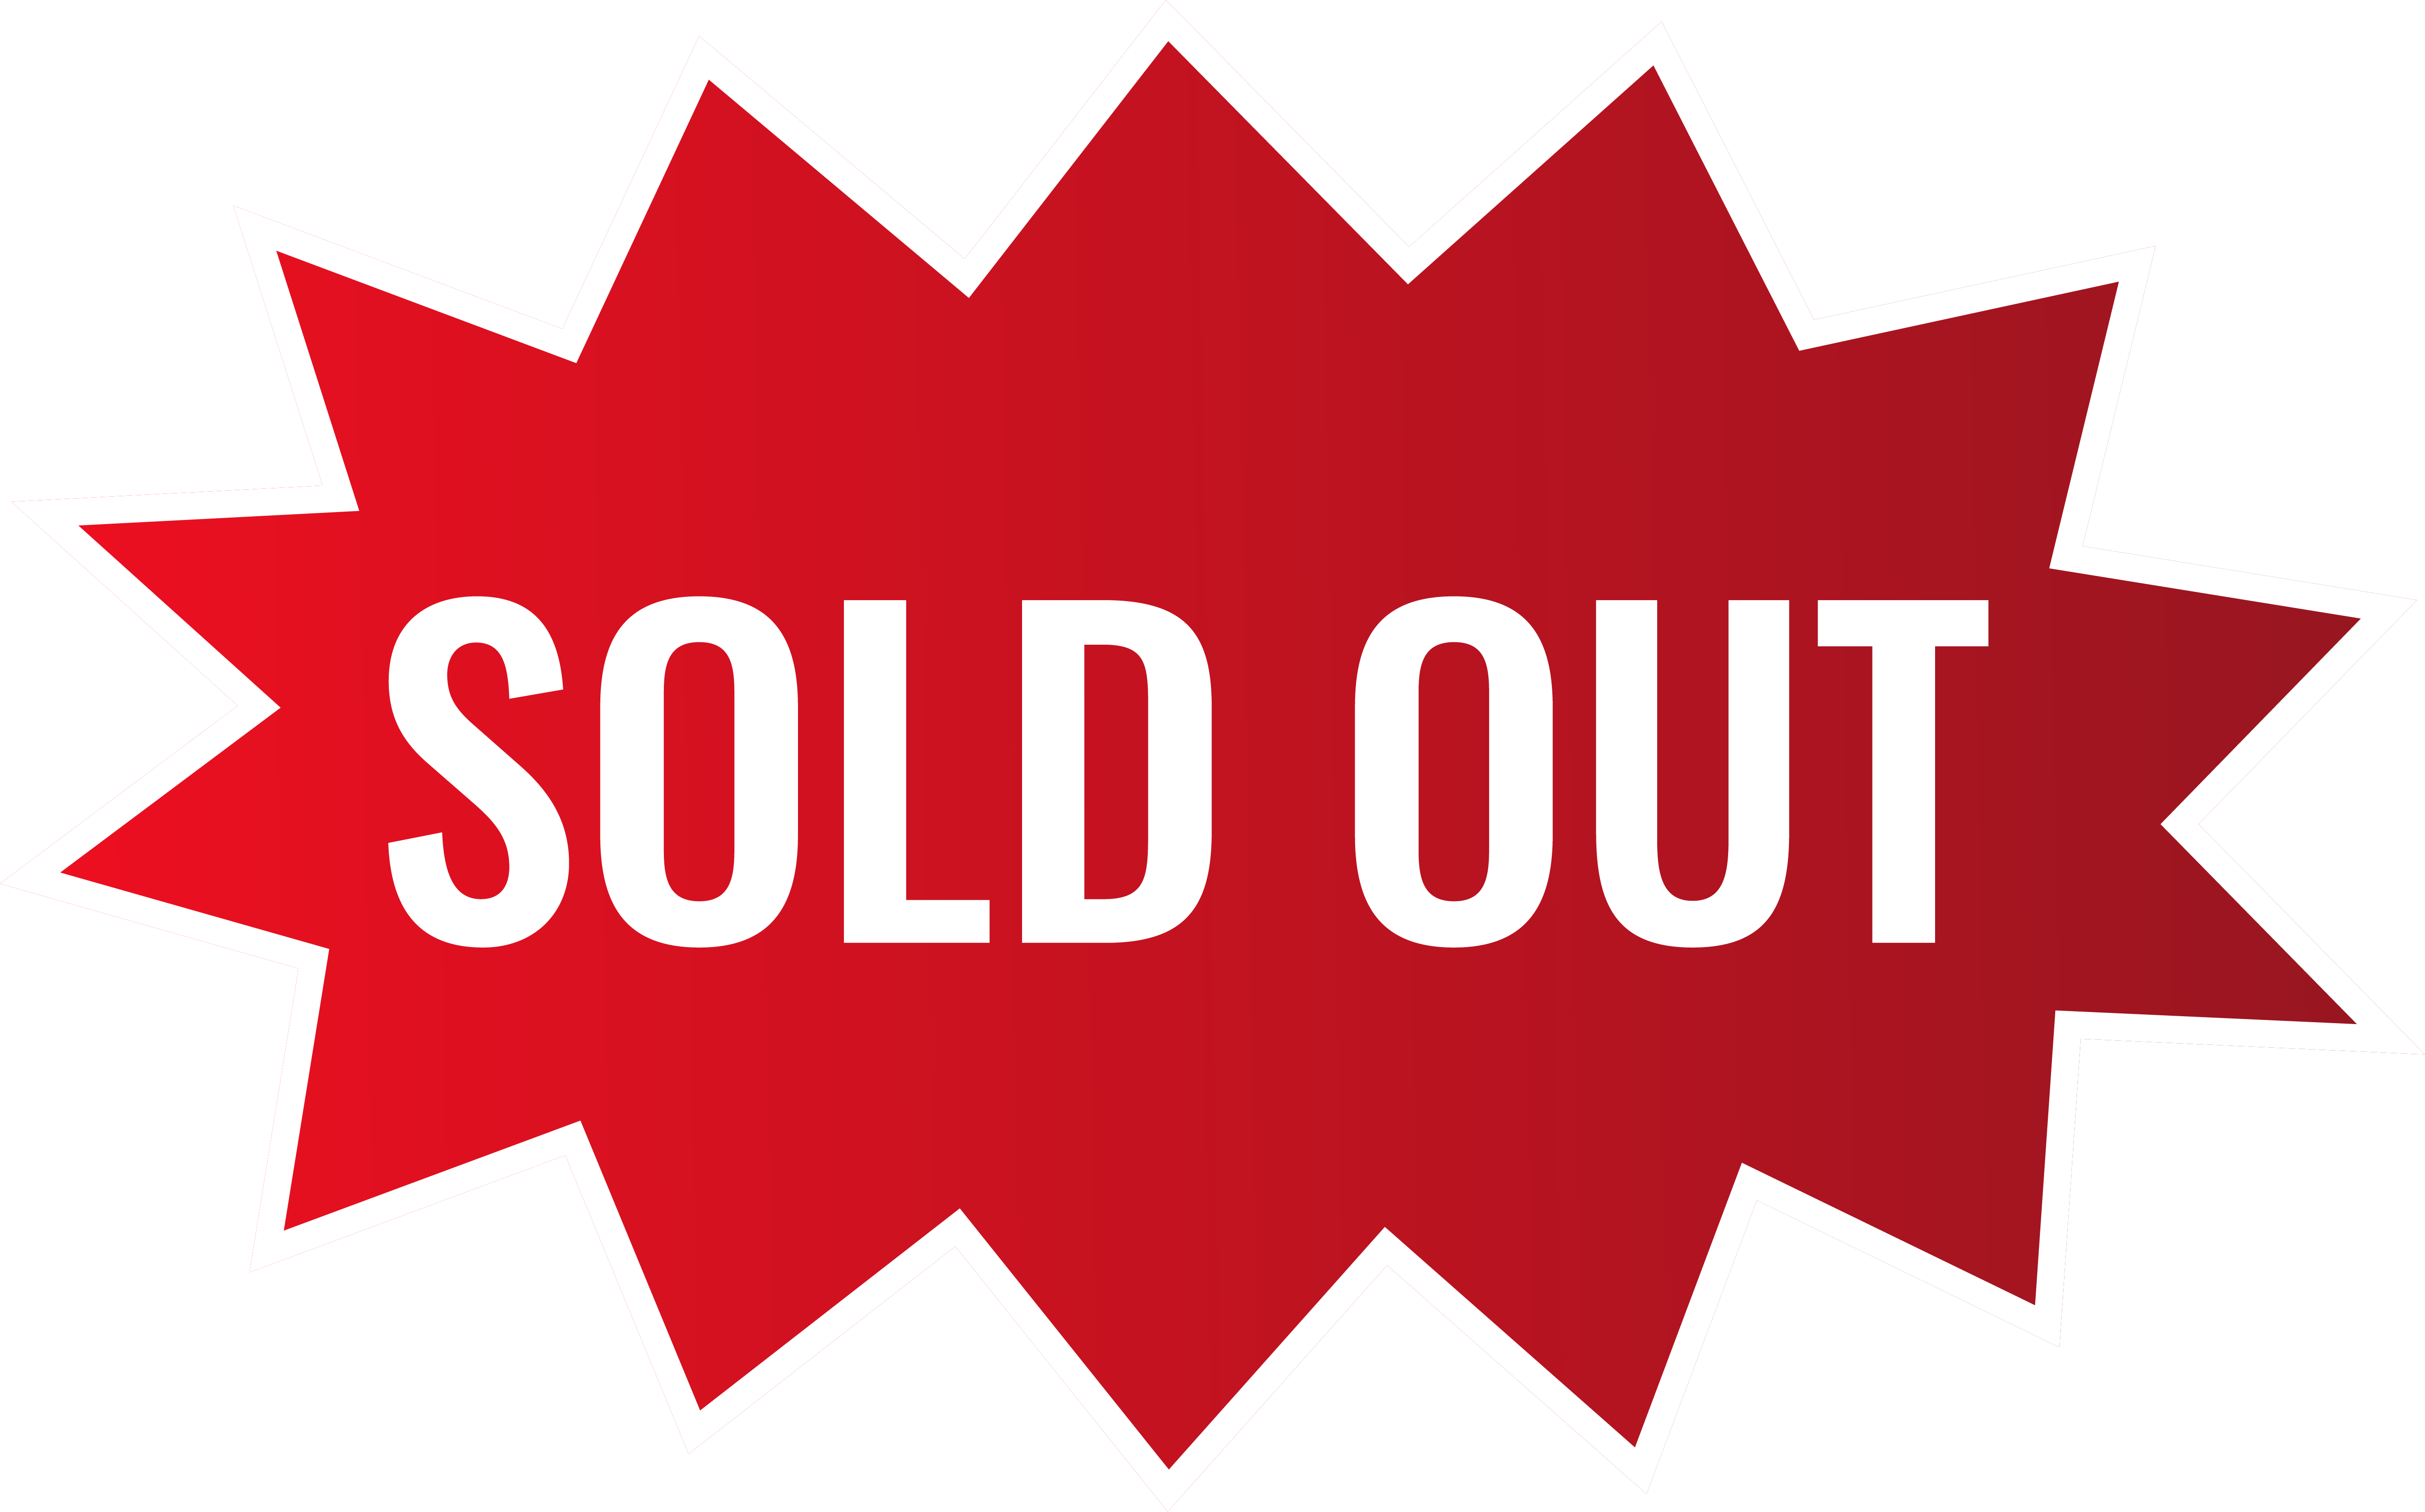 Sold Out graphic